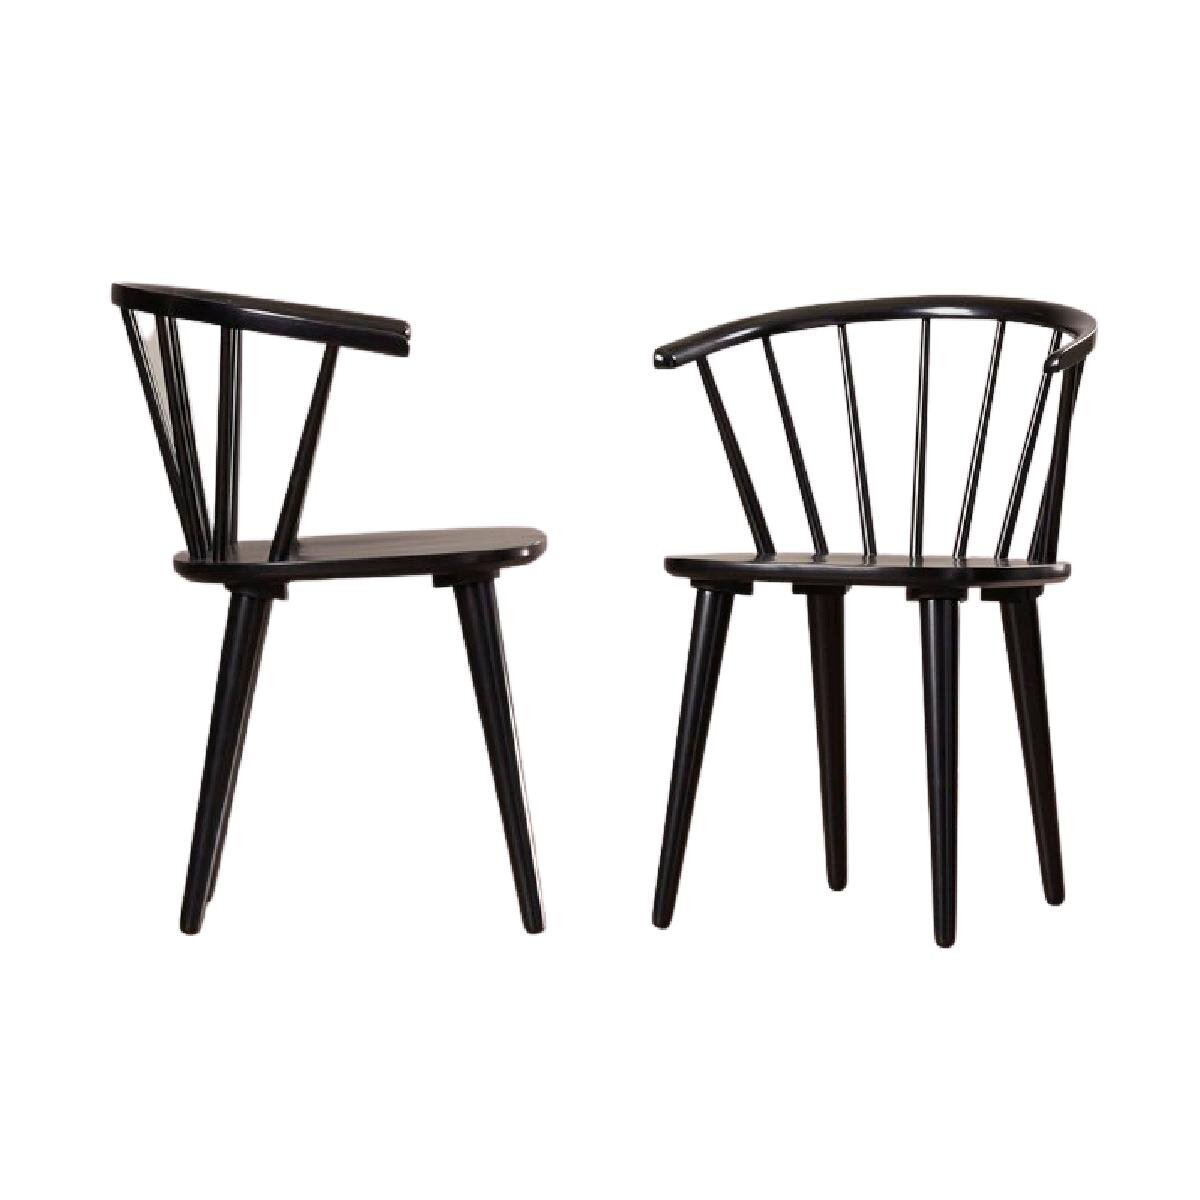 The High/Low List: French Country Edition - High end furniture and decor and budget friendly lookalikes. Black spindle back chair | Nadine Stay